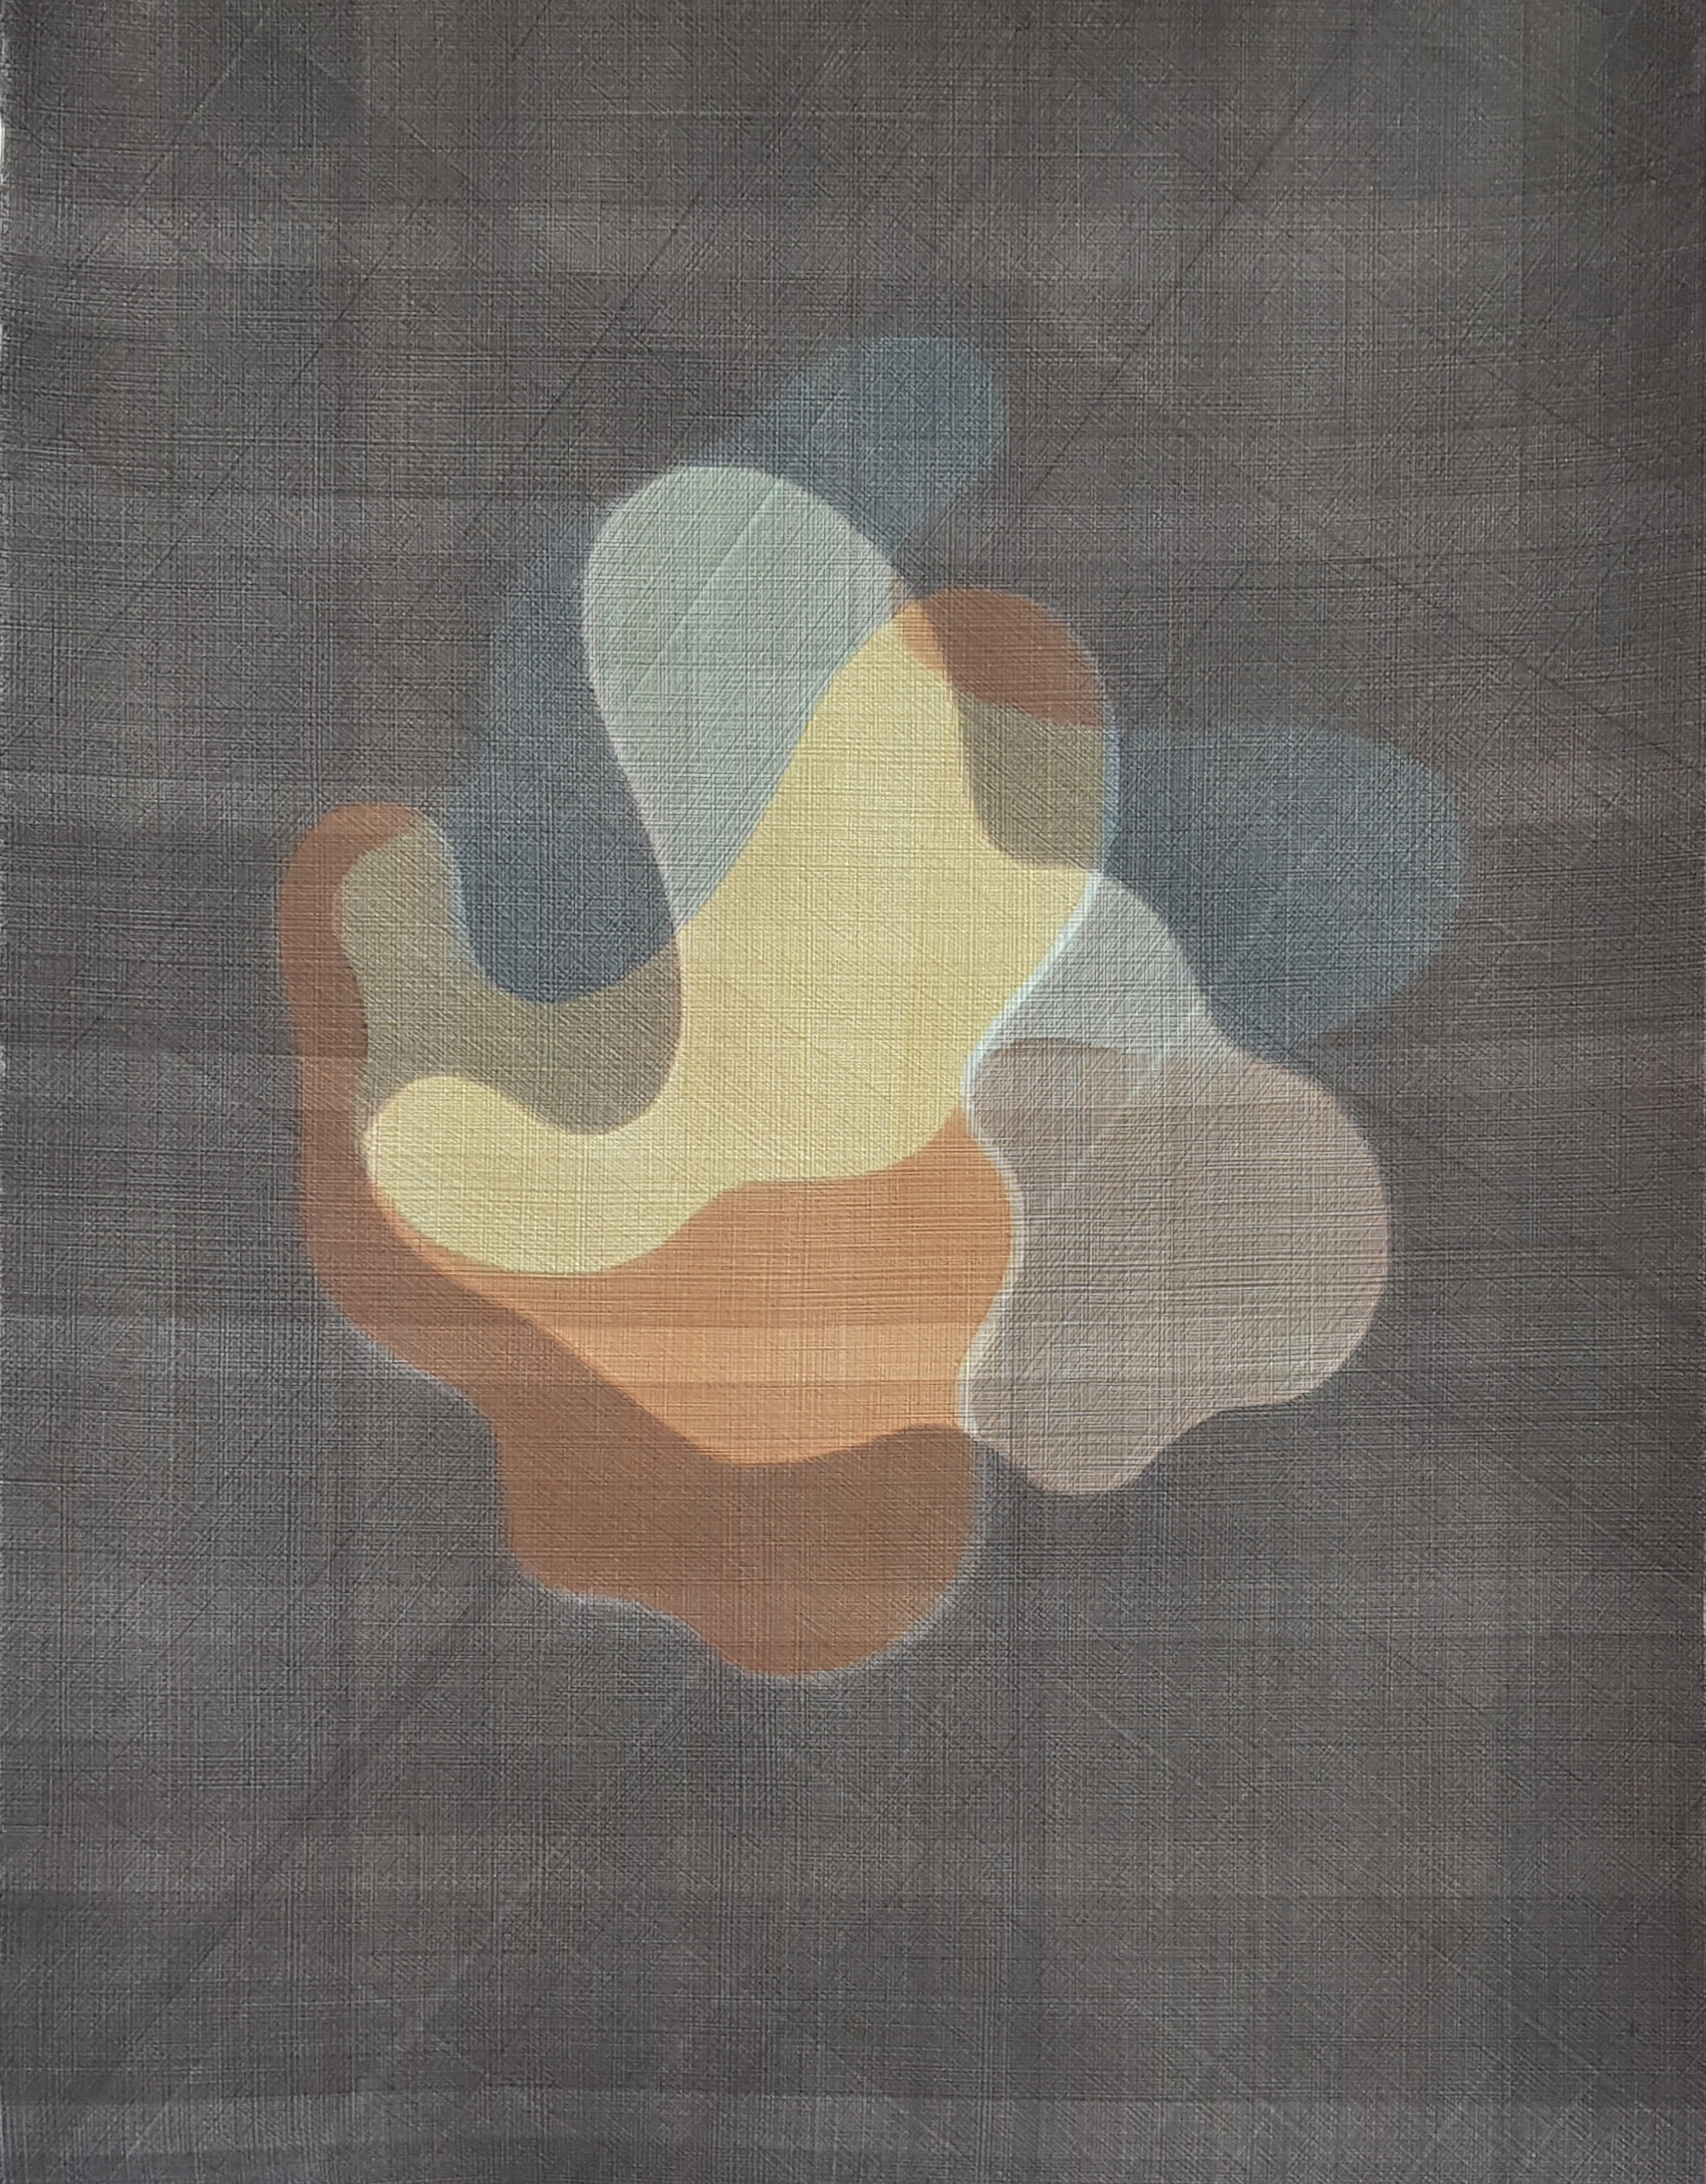   Untitled (Rotation)   Casein Paint on Paper  76 x 56 cm 